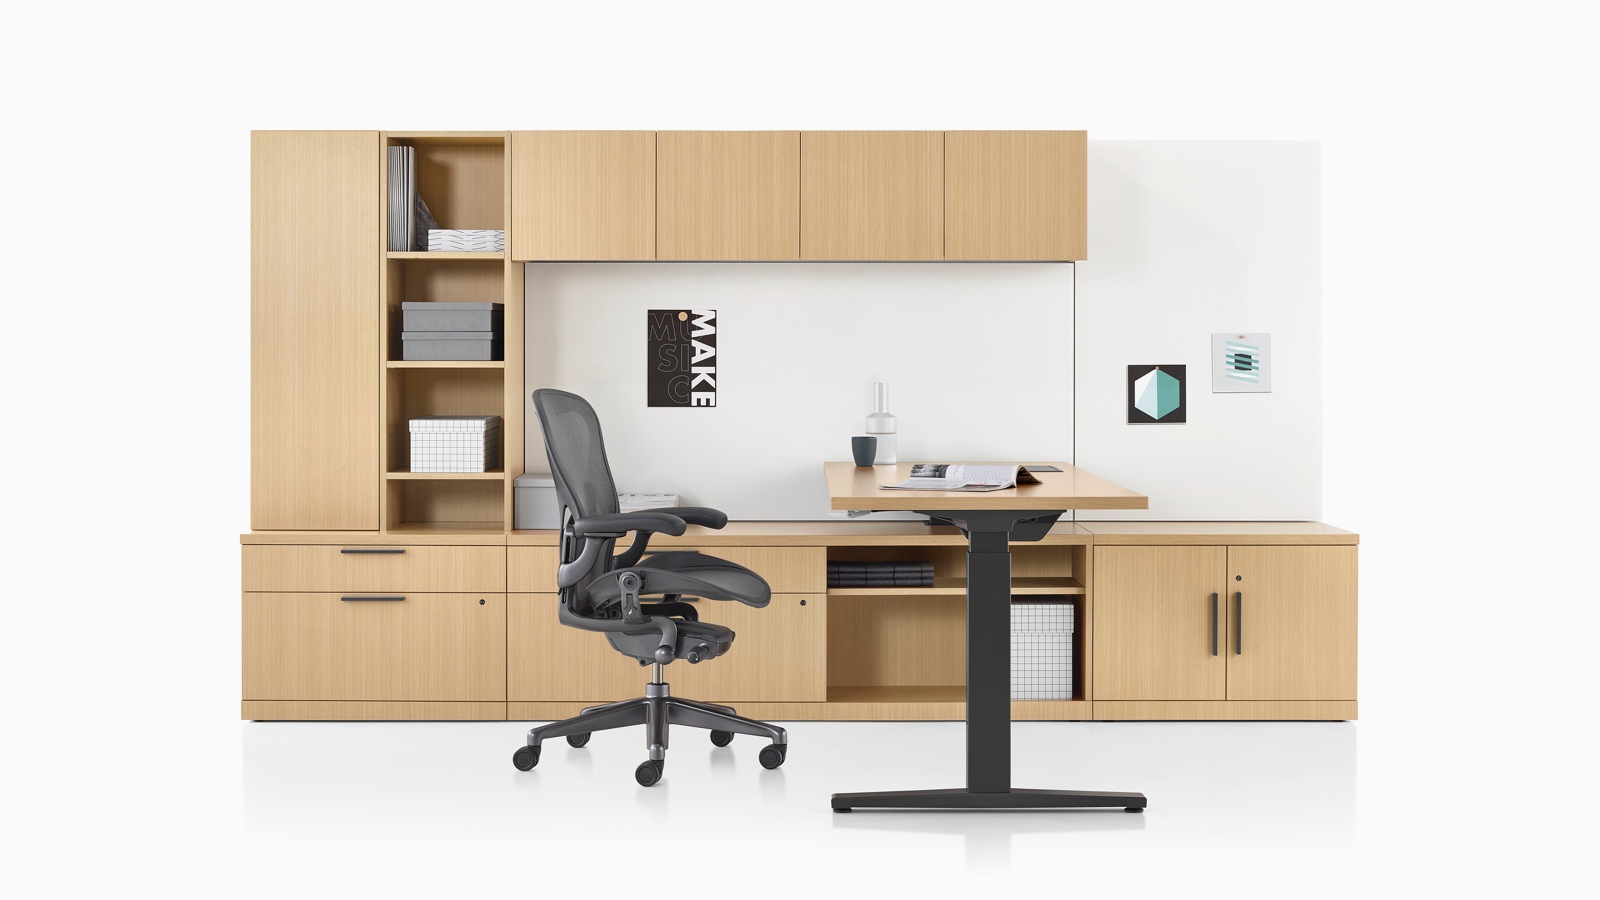 A Canvas Private Office with light wood storage, height-adjustable desk, and black Aeron office chair.